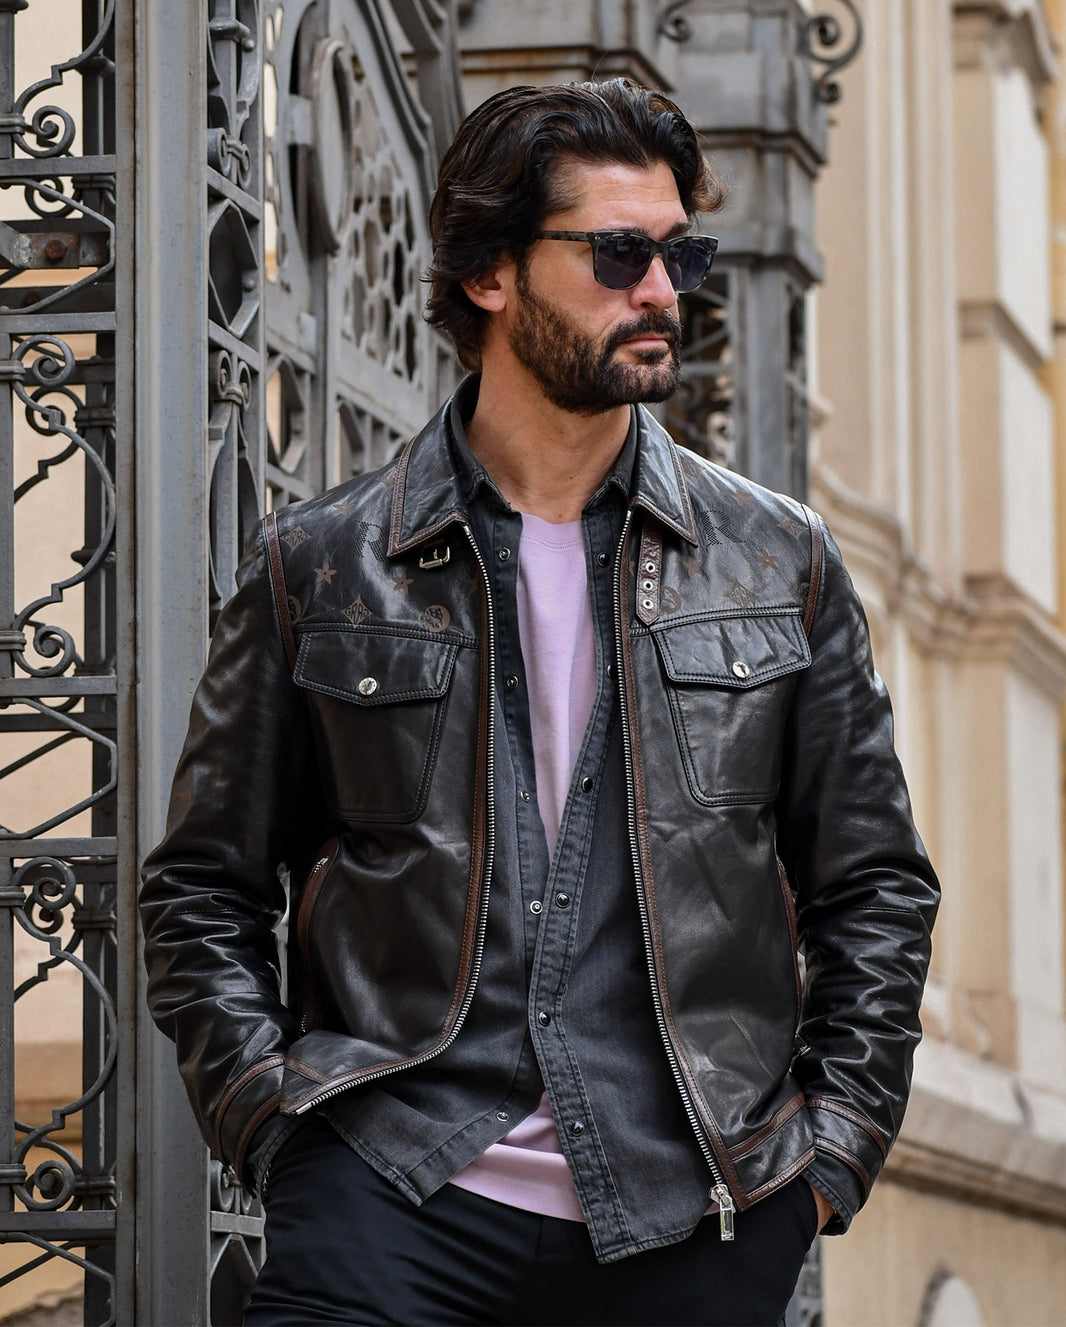 Genuine Leather Coats and Jackets, Real Leather Jacket